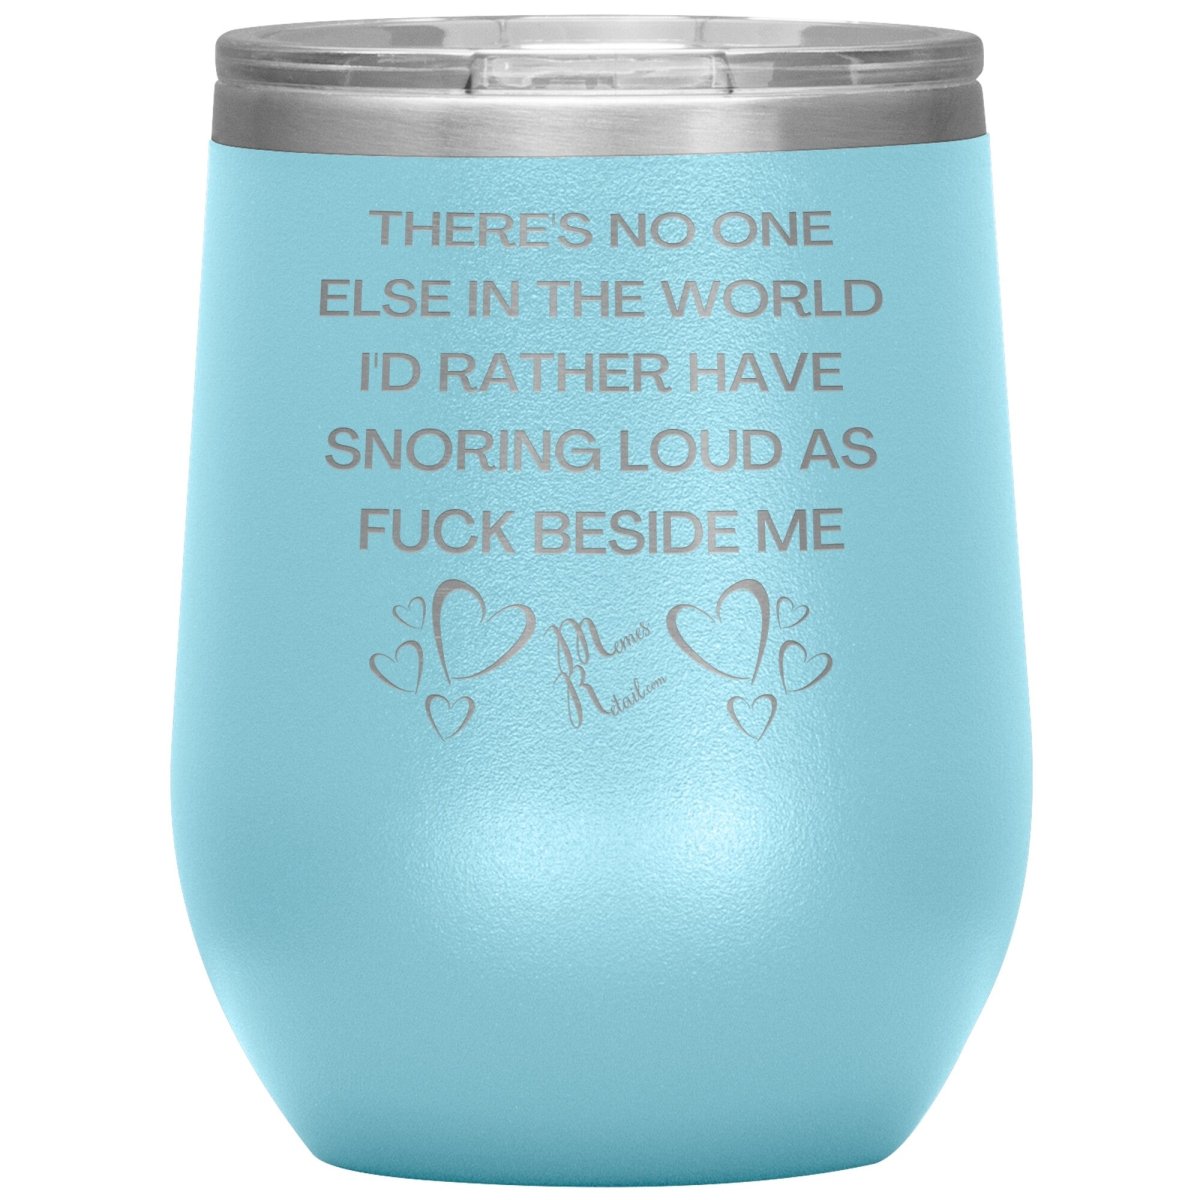 There's No One Else in the World I'd Rather Have Snoring Loud, 12oz Wine Insulated Tumbler / Light Blue - MemesRetail.com